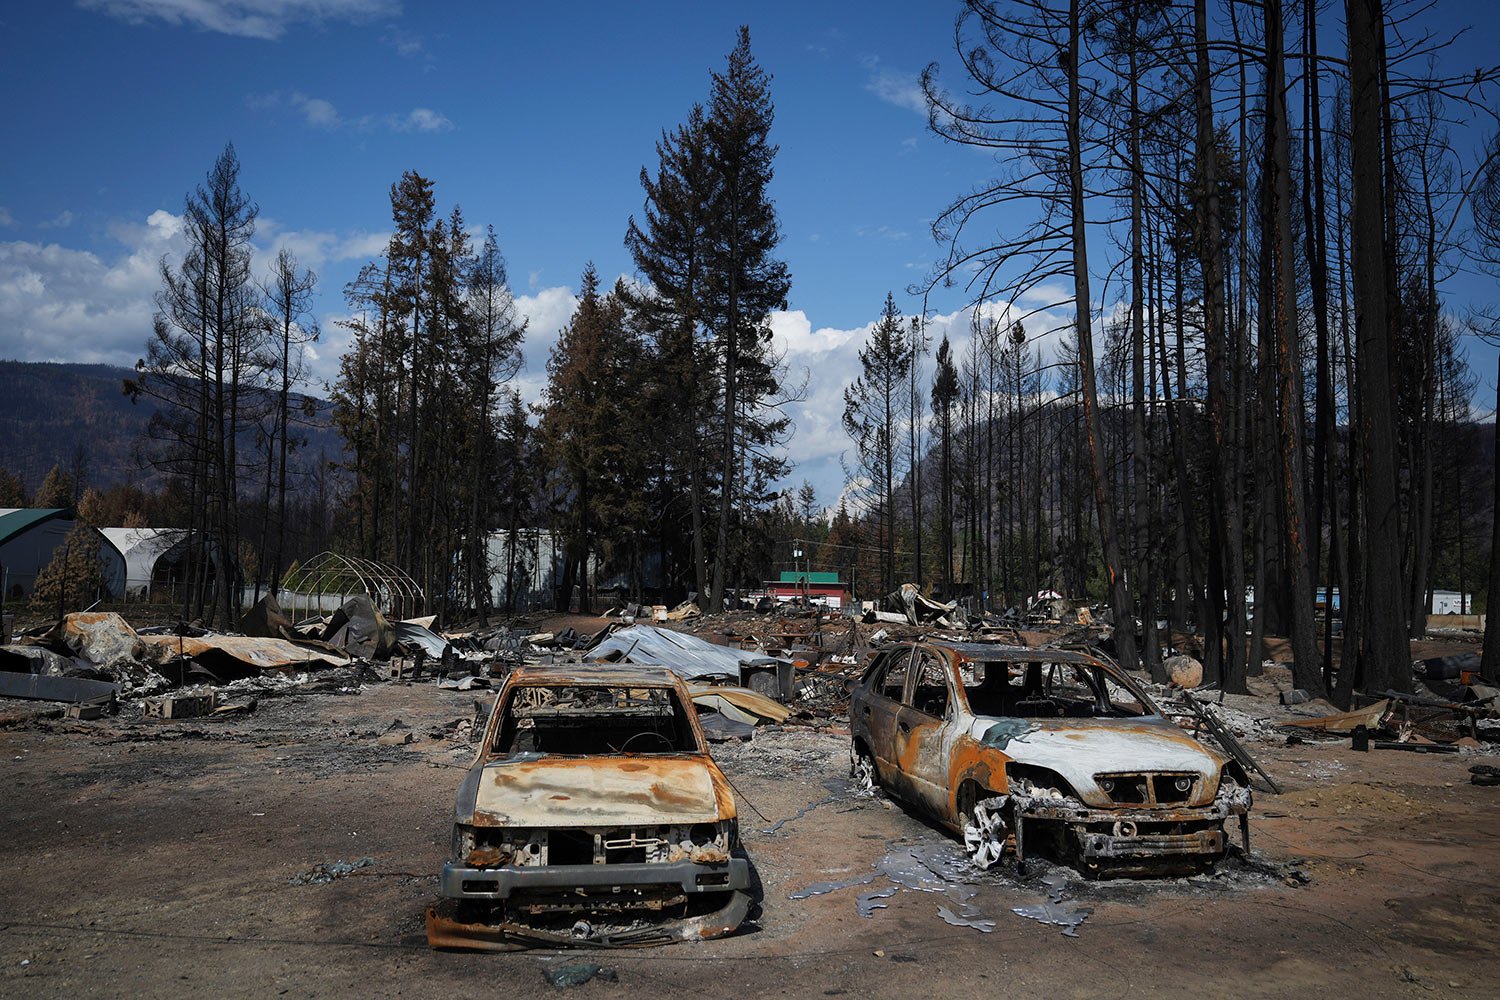  Burned vehicles and other debris are scattered about a property destroyed by the Bush Creek East wildfire, in Scotch Creek, British Columbia, Canada, on Sept. 6, 2023. (Darryl Dyck/The Canadian Press via AP) 